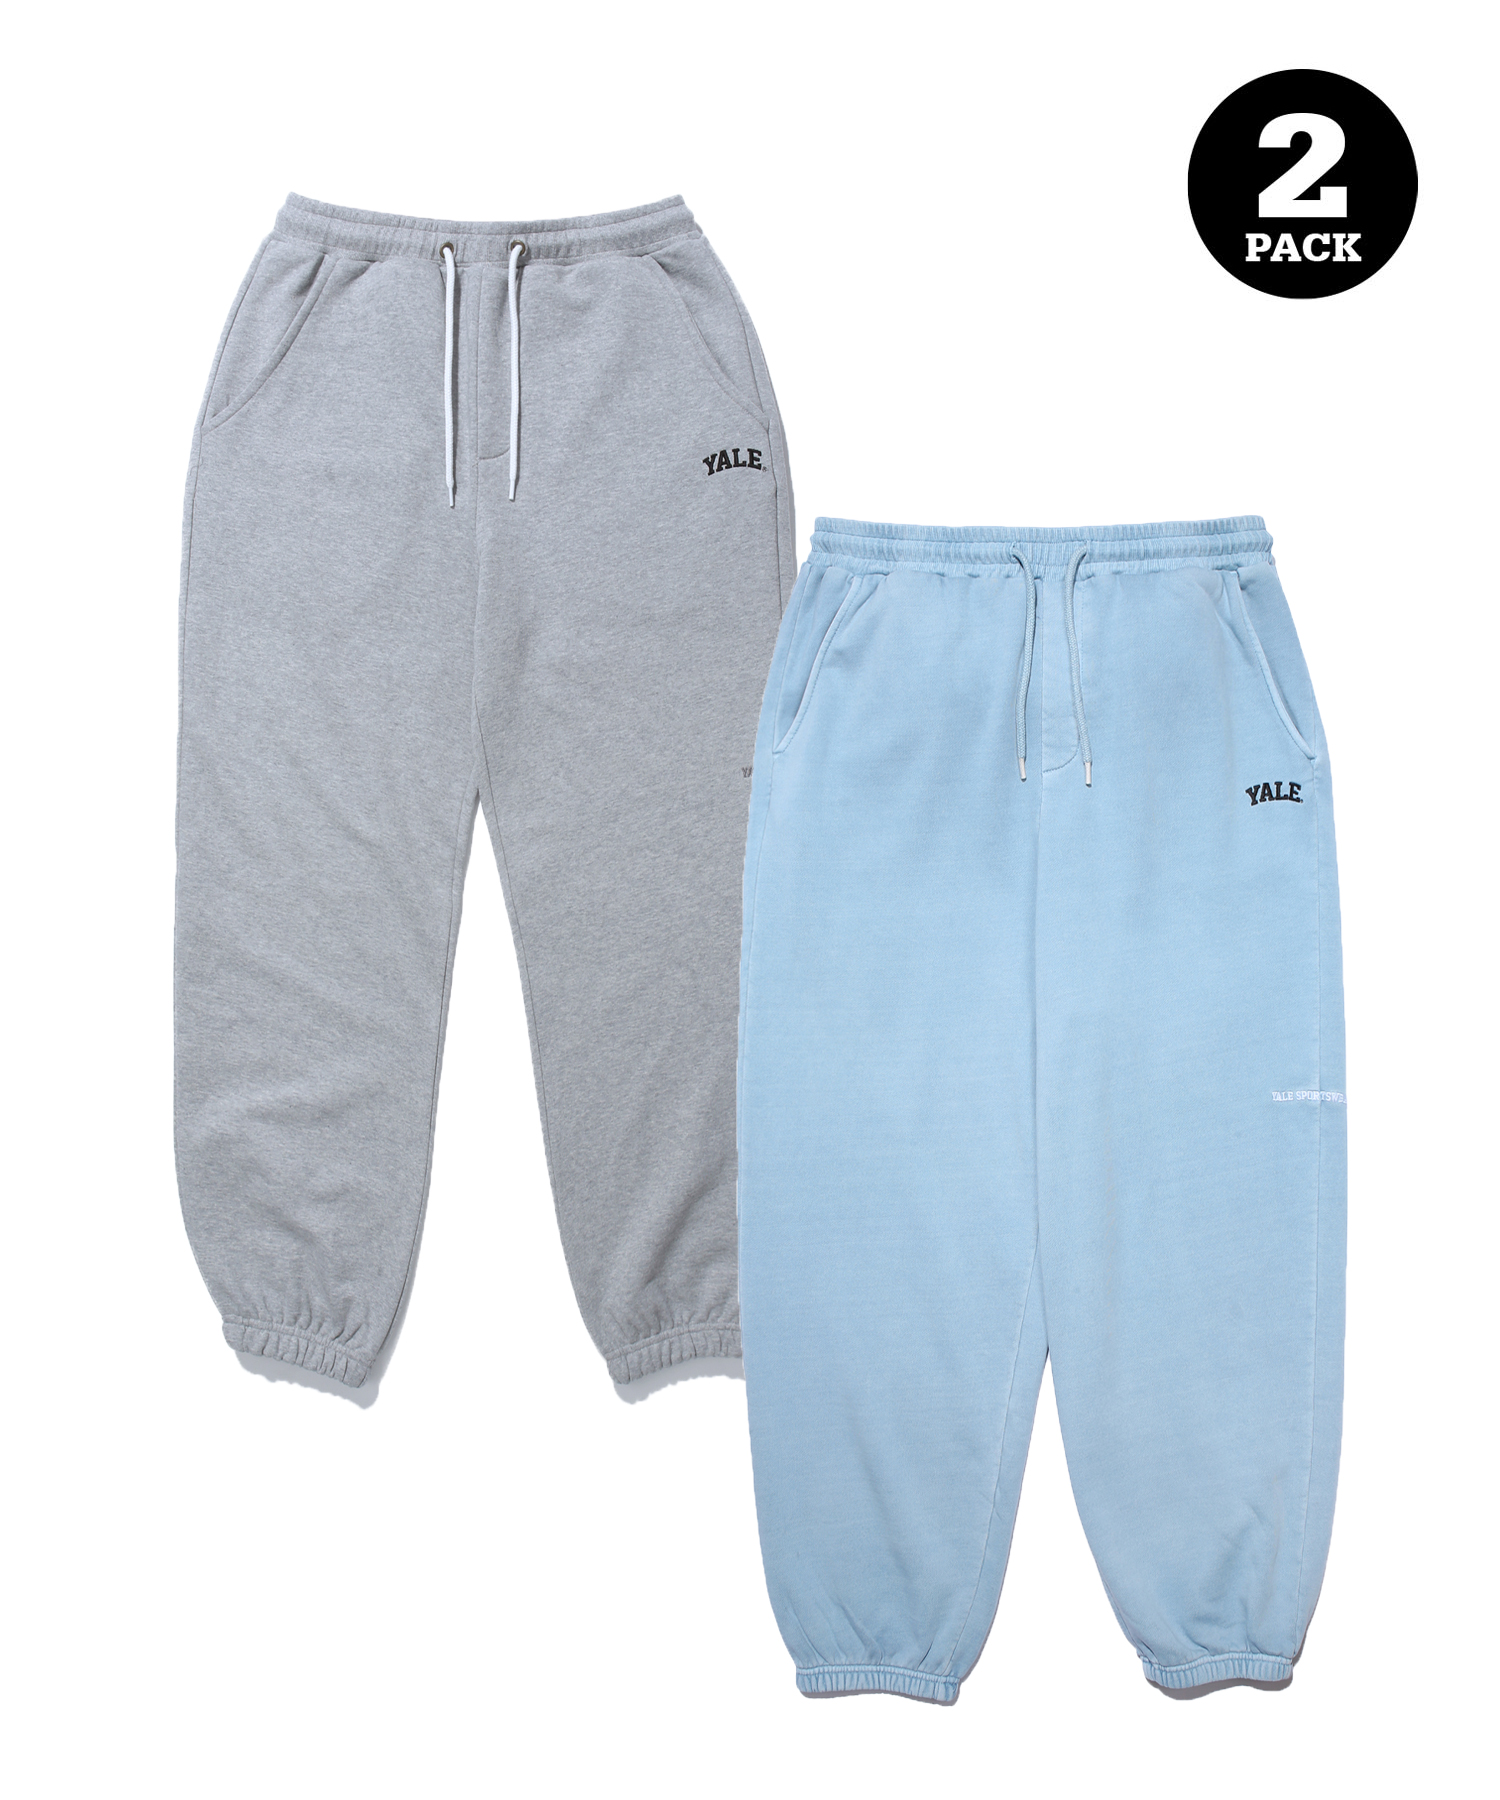 [ONEMILE WEAR] 2PACK SMALL ARCH SWEAT PANTS GRAY / BLUE